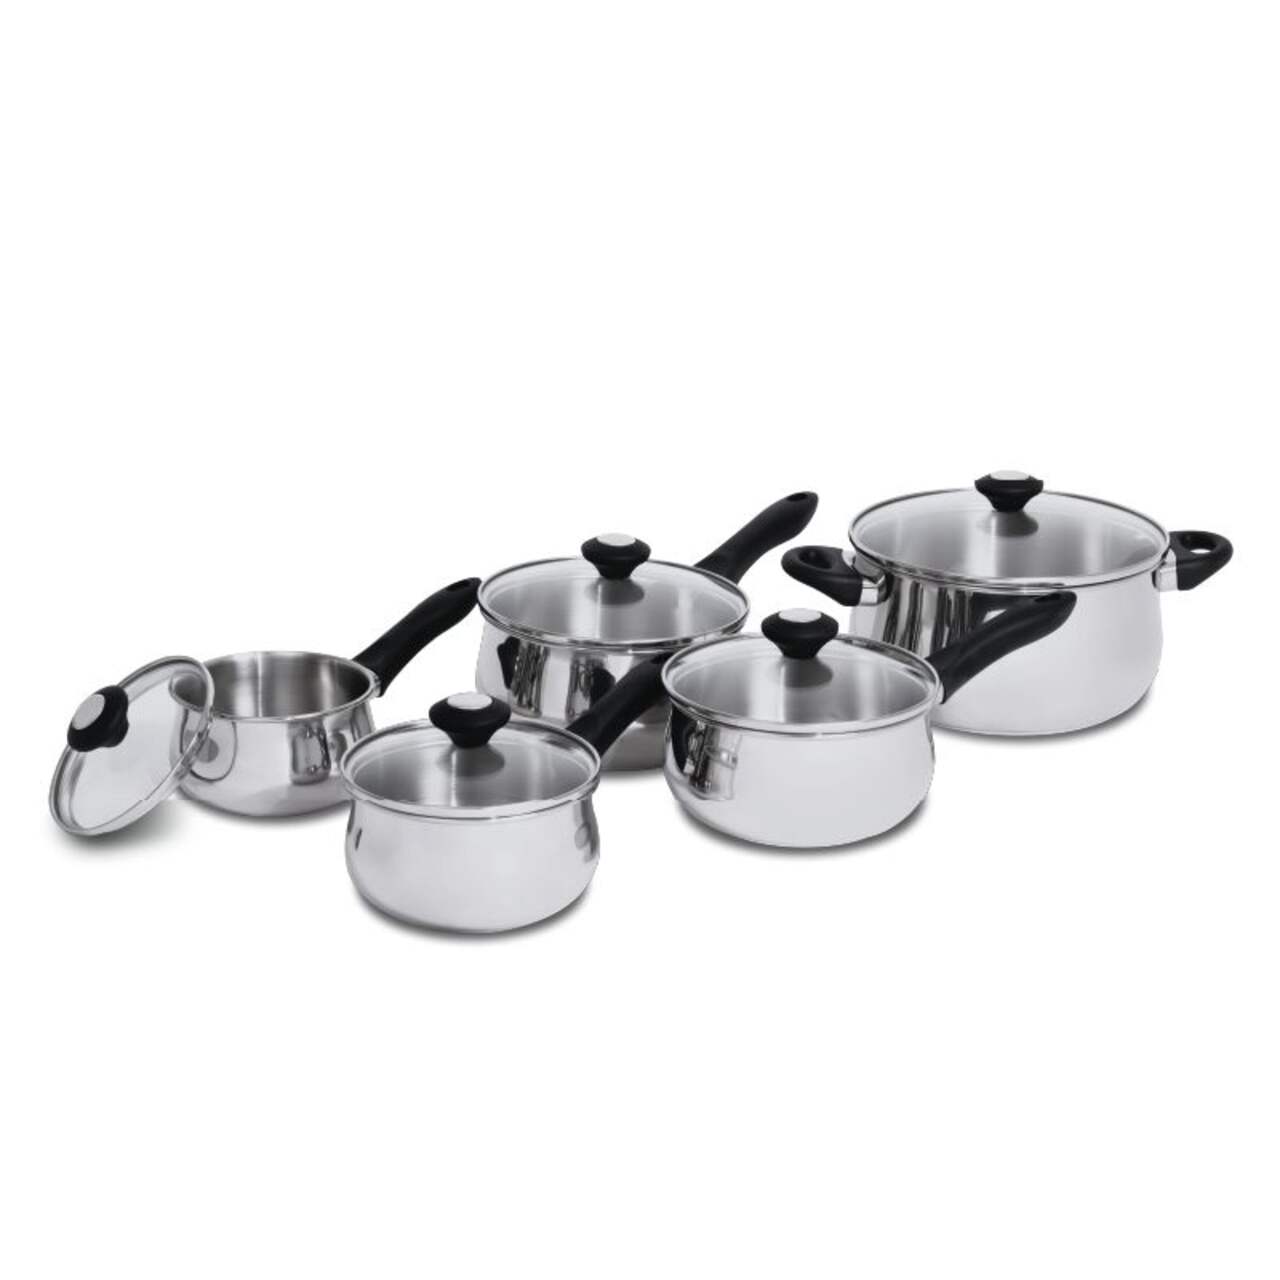 Lagostina Ticino Stainless Steel Cookware Set & Oven Safe, 10-pc